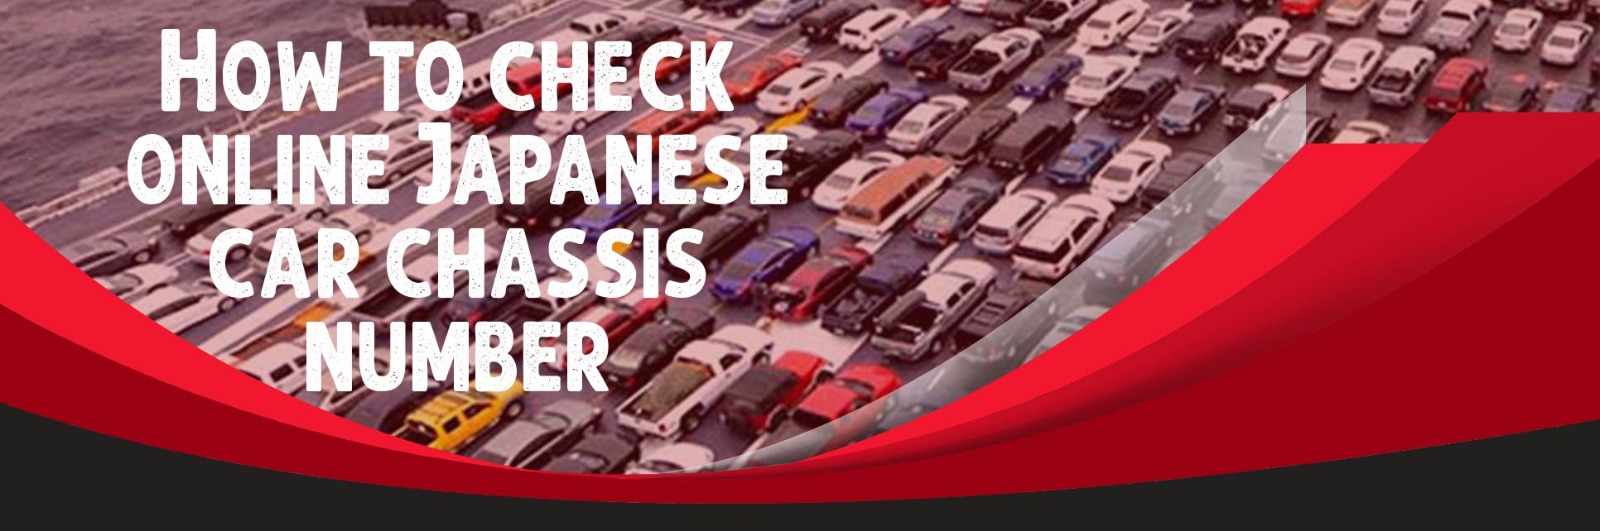 How to check online Japanese car chassis numbers?